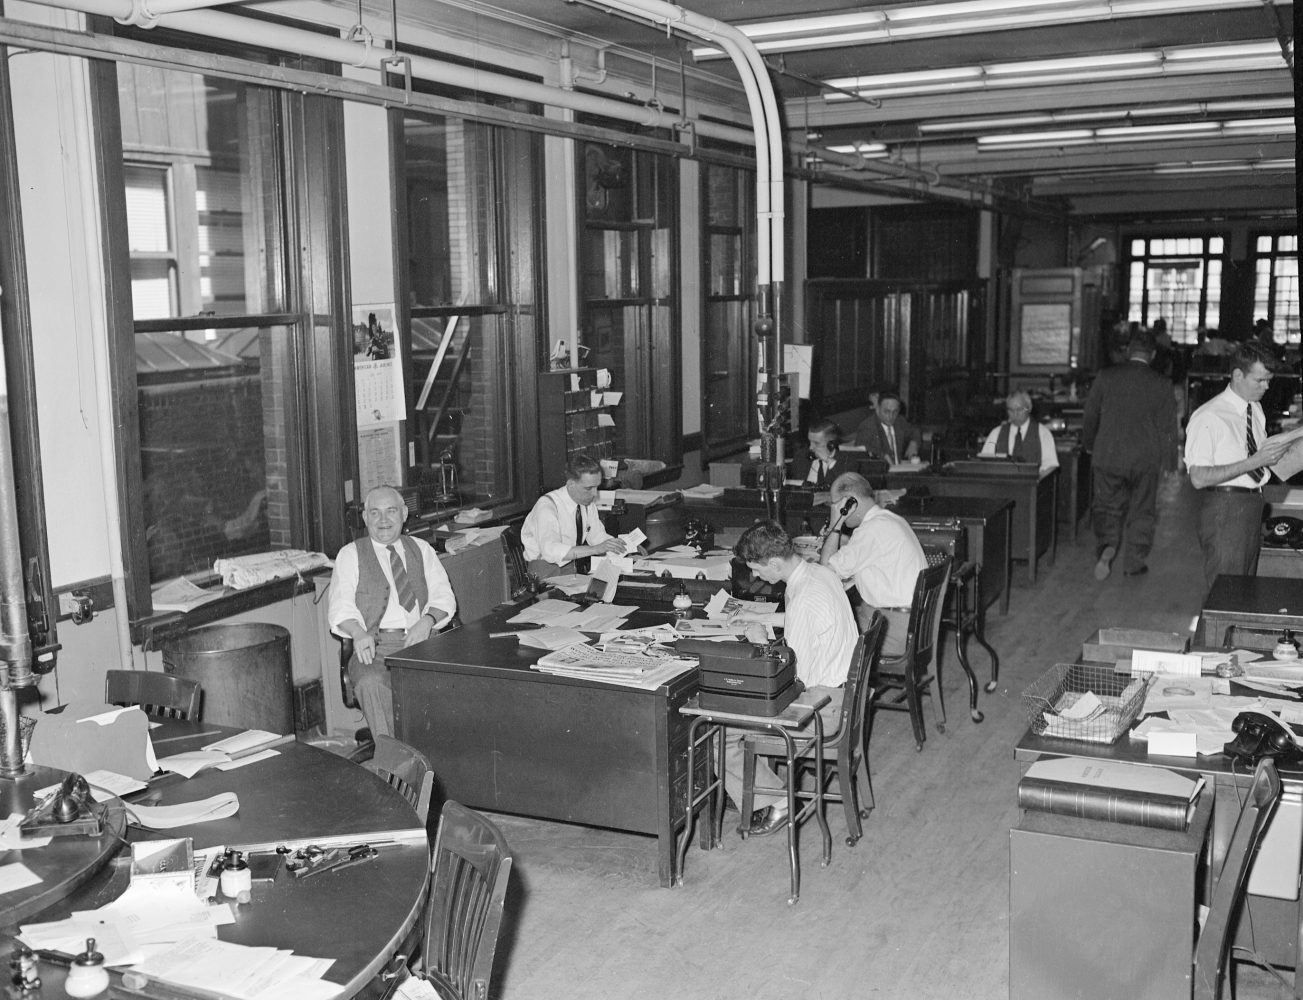 Telegram and Gazette Newsroom (May 19, 1949) from the George Cocaine collection at Worcester Historical Museum, Worcester Massachusetts.